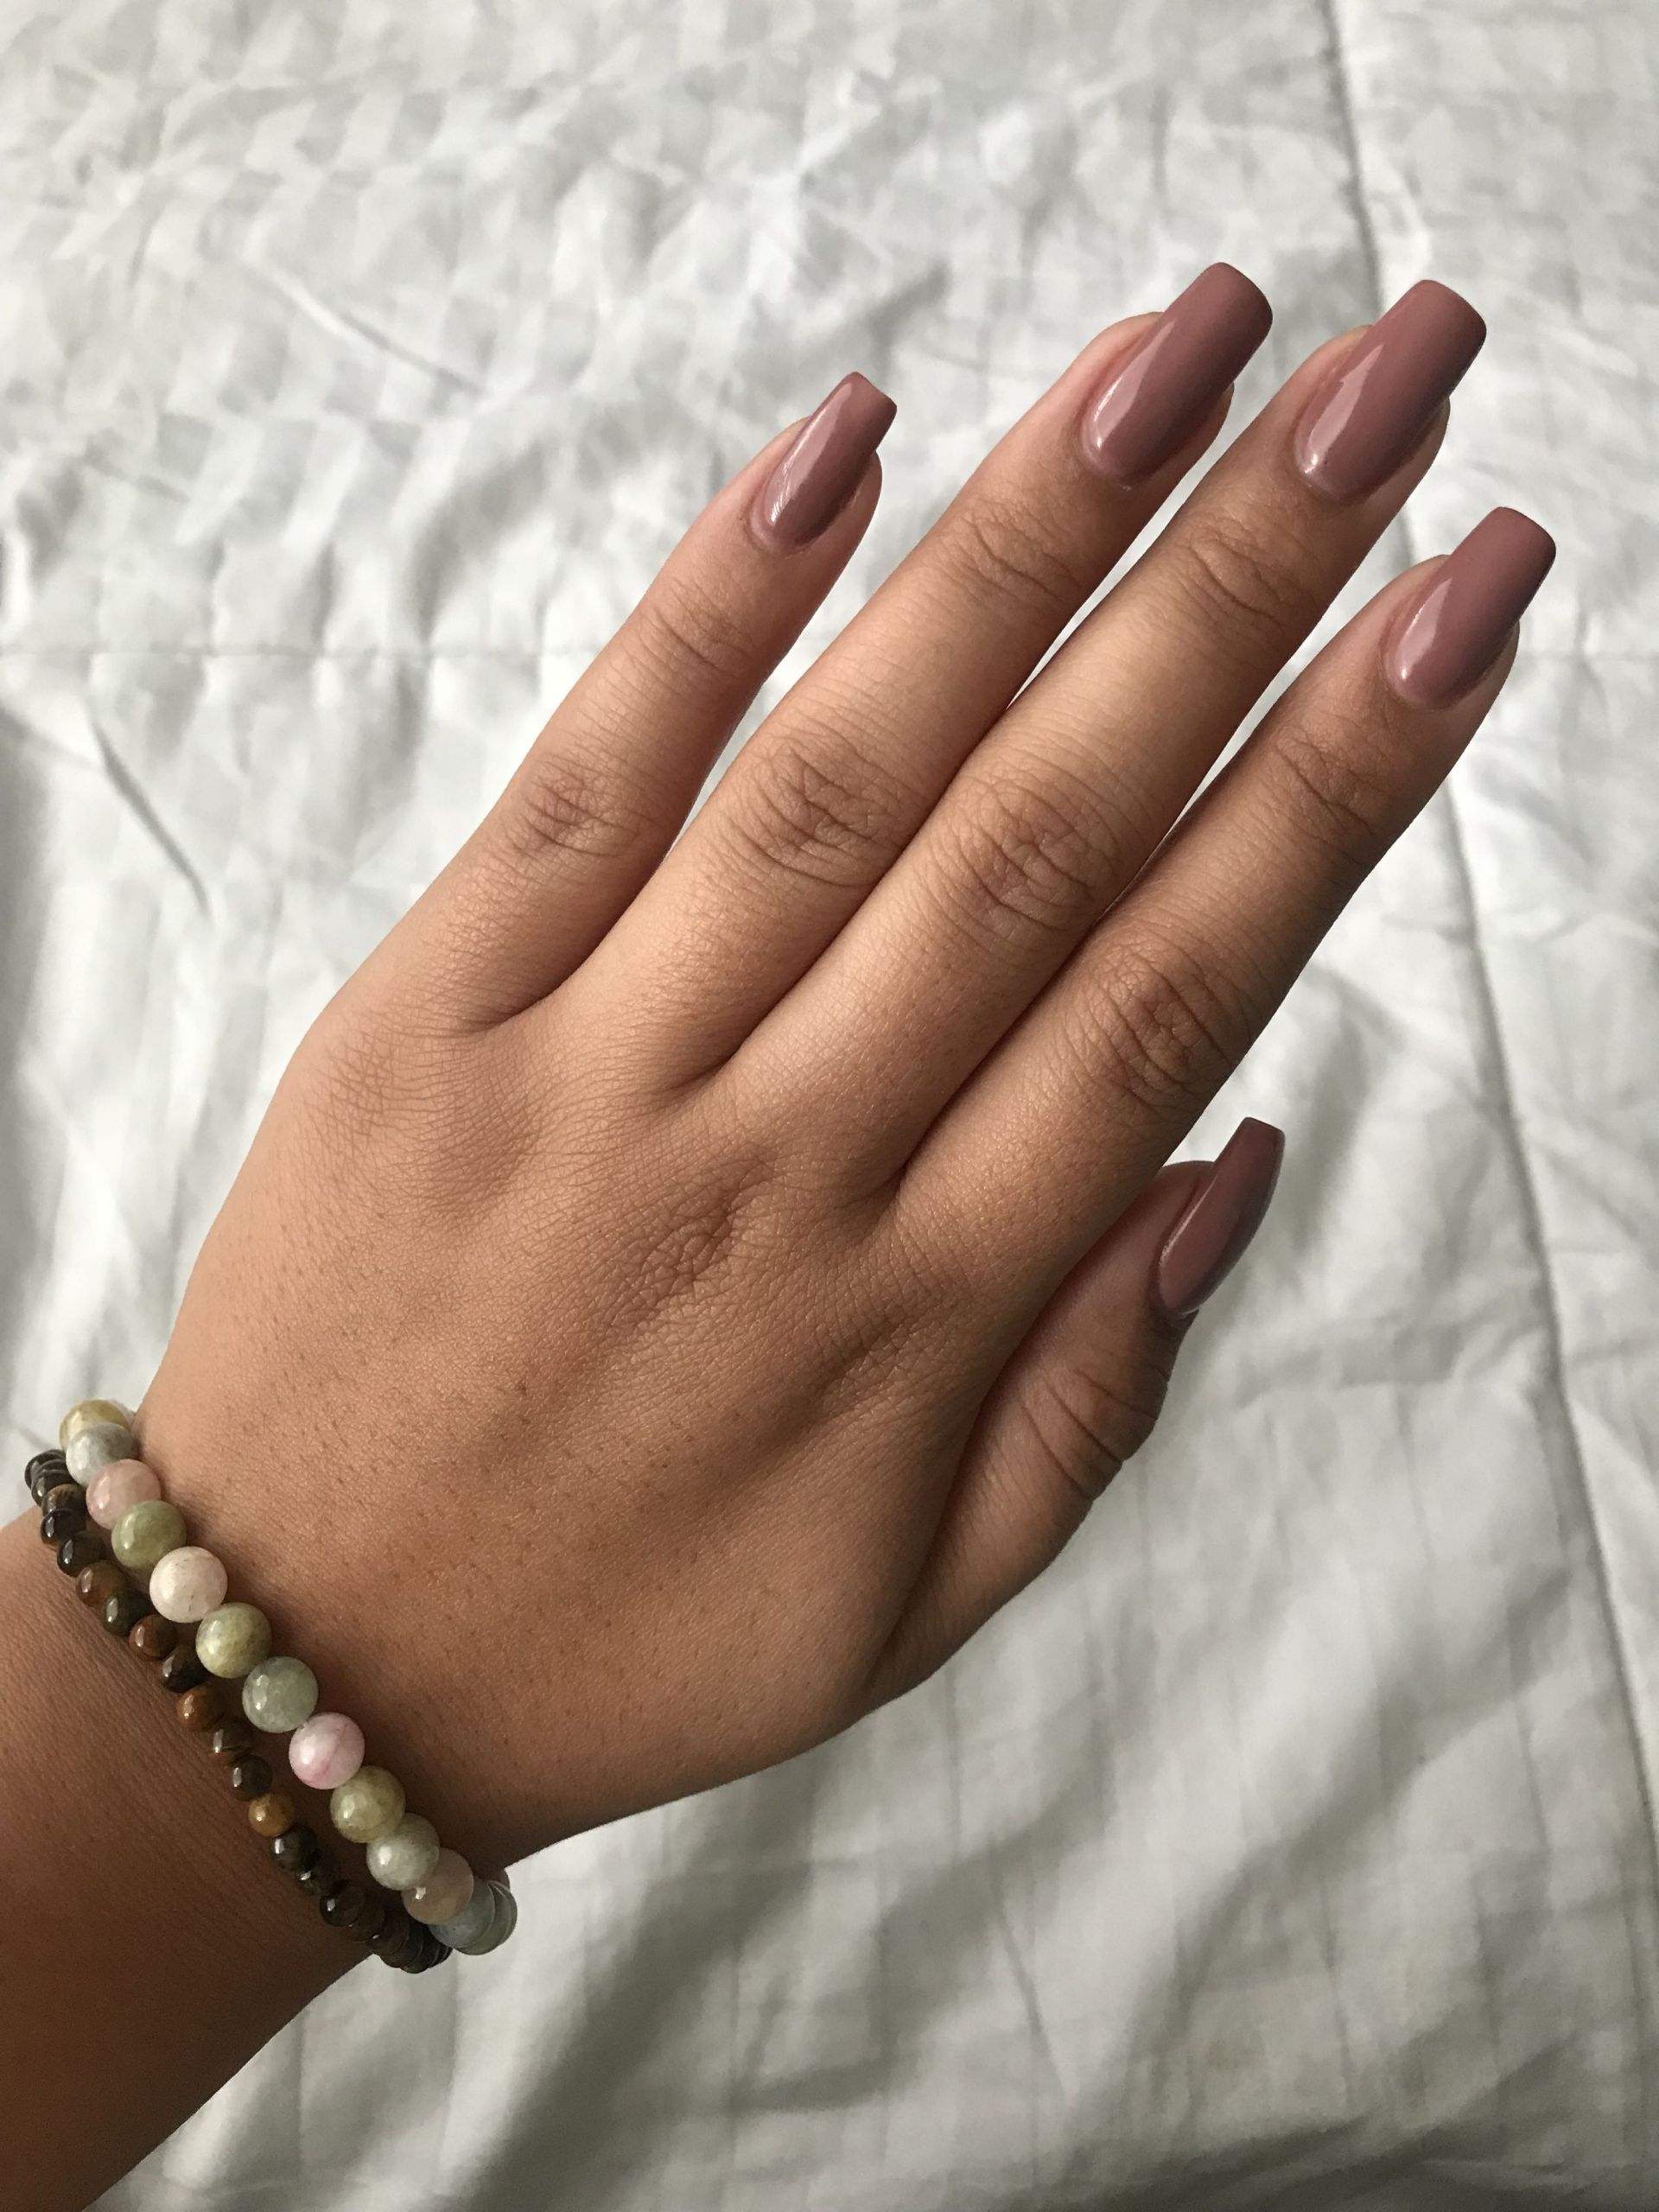 Best 22 Nail Colors January 2020 - Home, Family, Style and Art Ideas